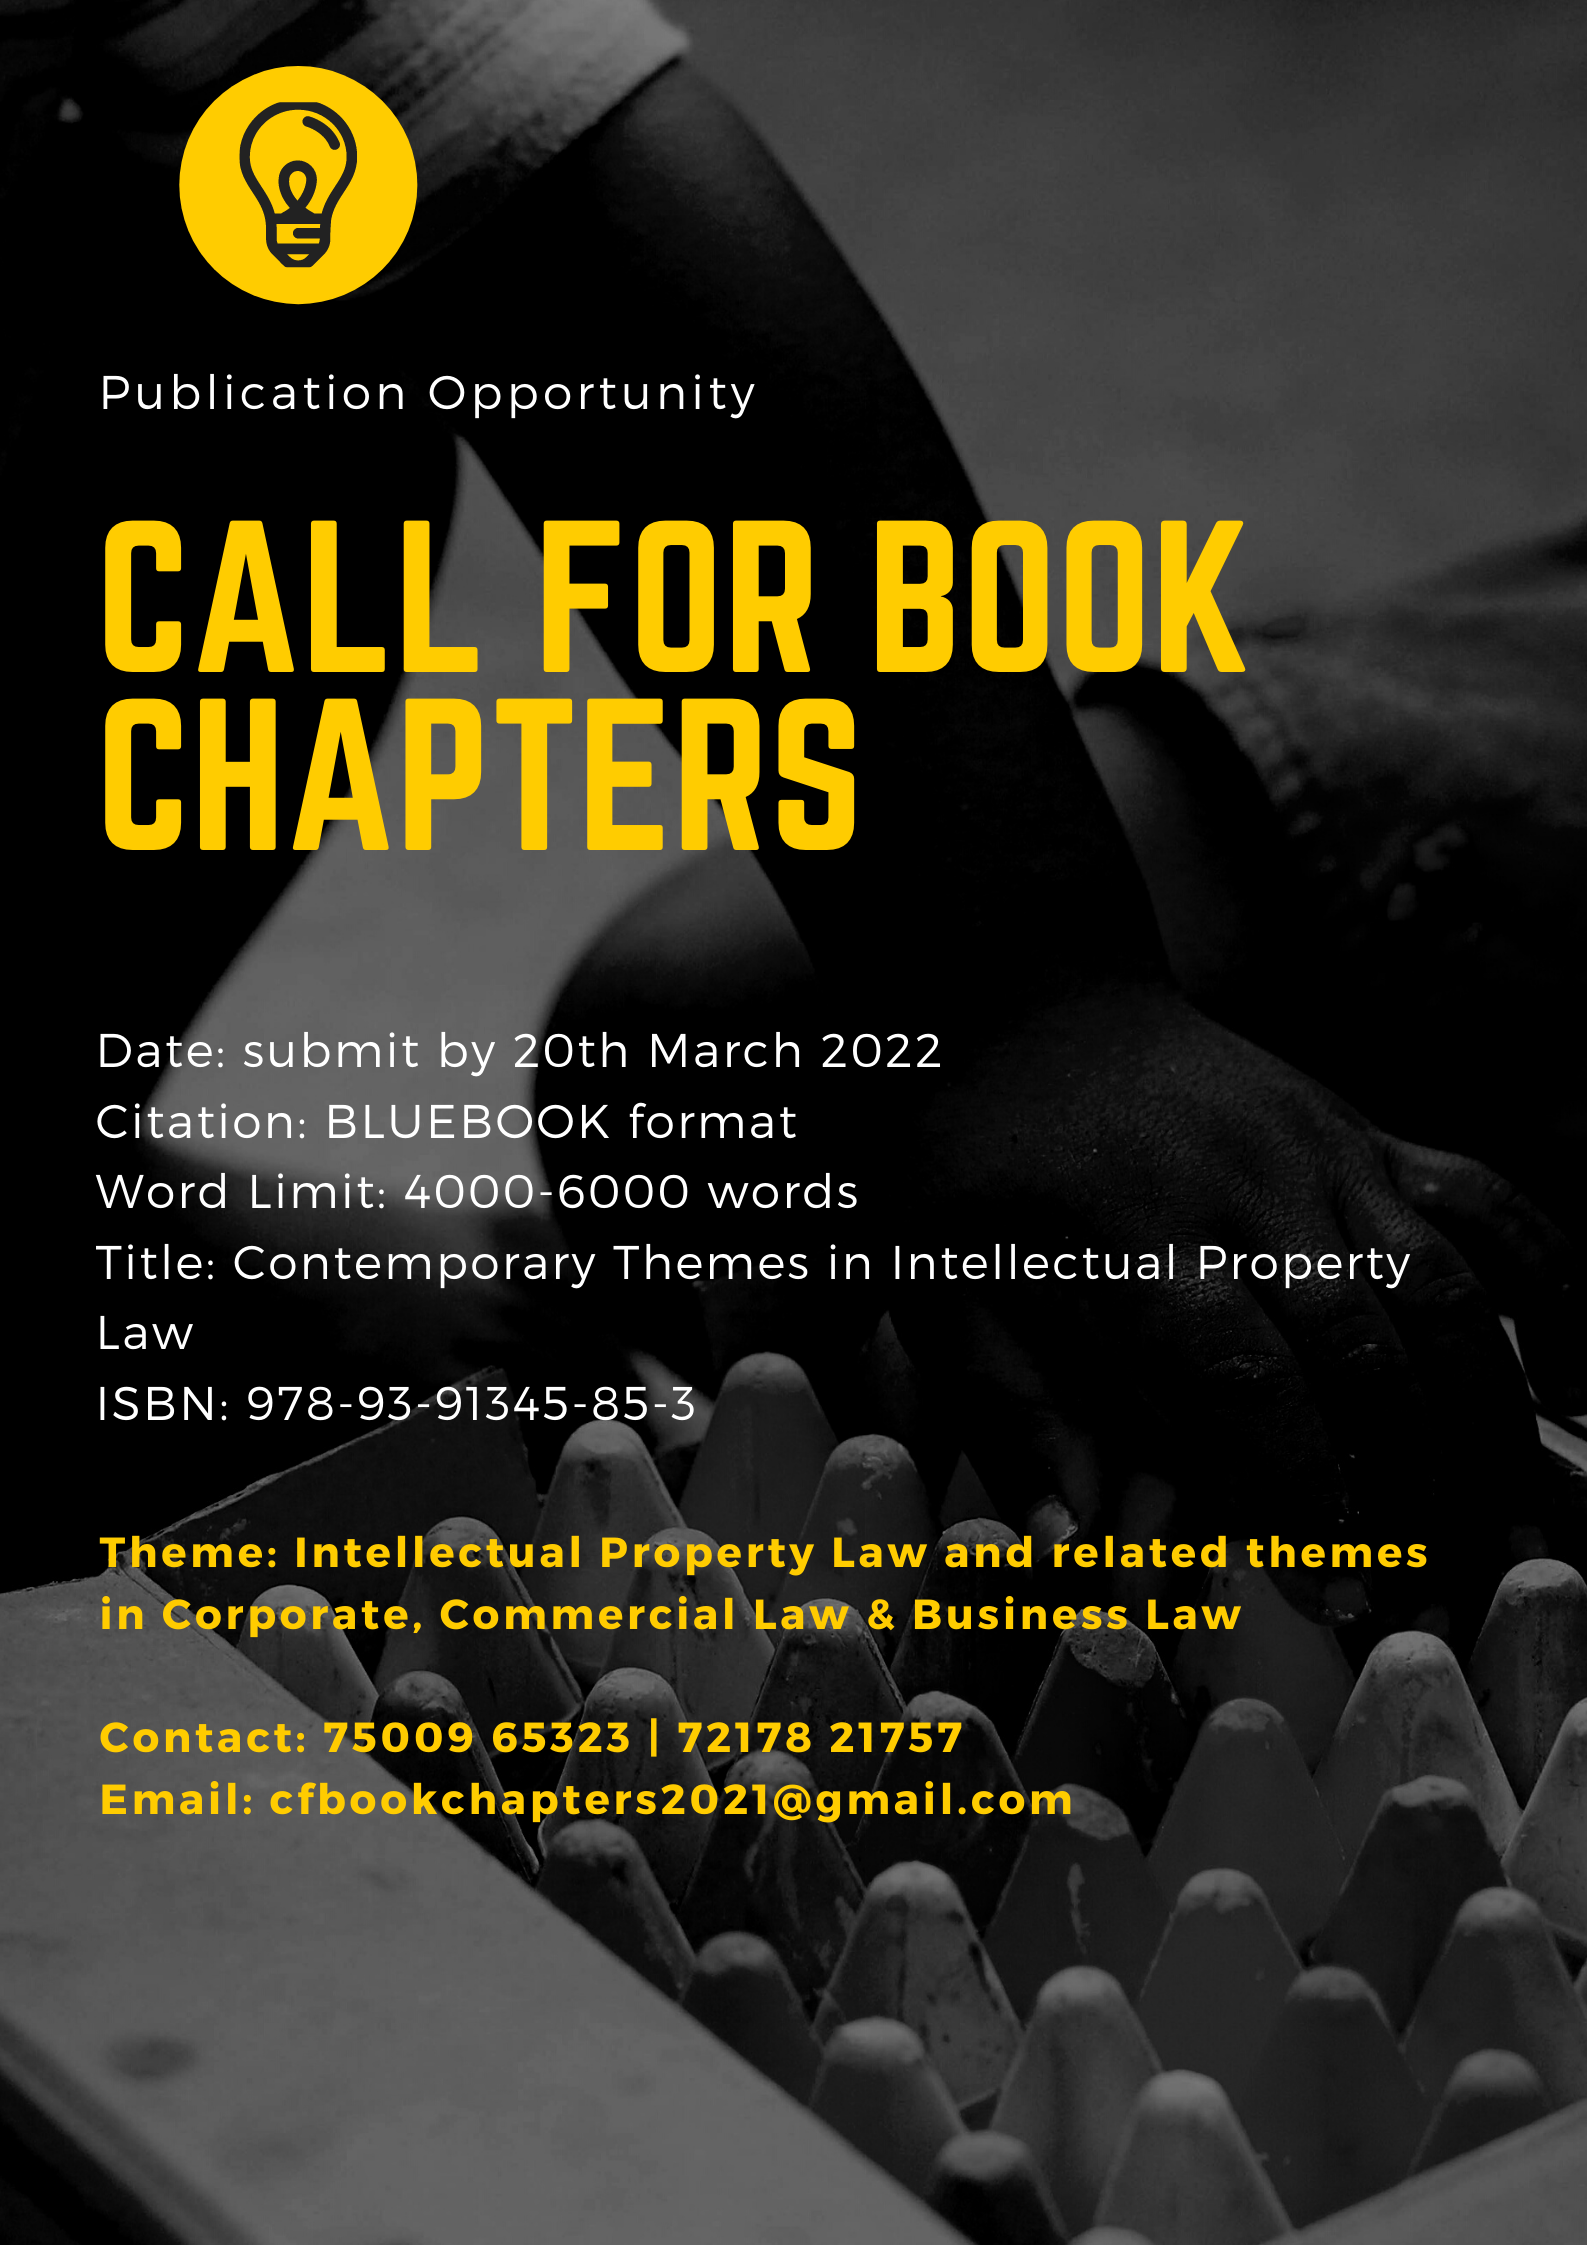 CALL FOR CHAPTERS FOR LAW STUDENTS IN AN EDITED BOOK “CONTEMPORARY